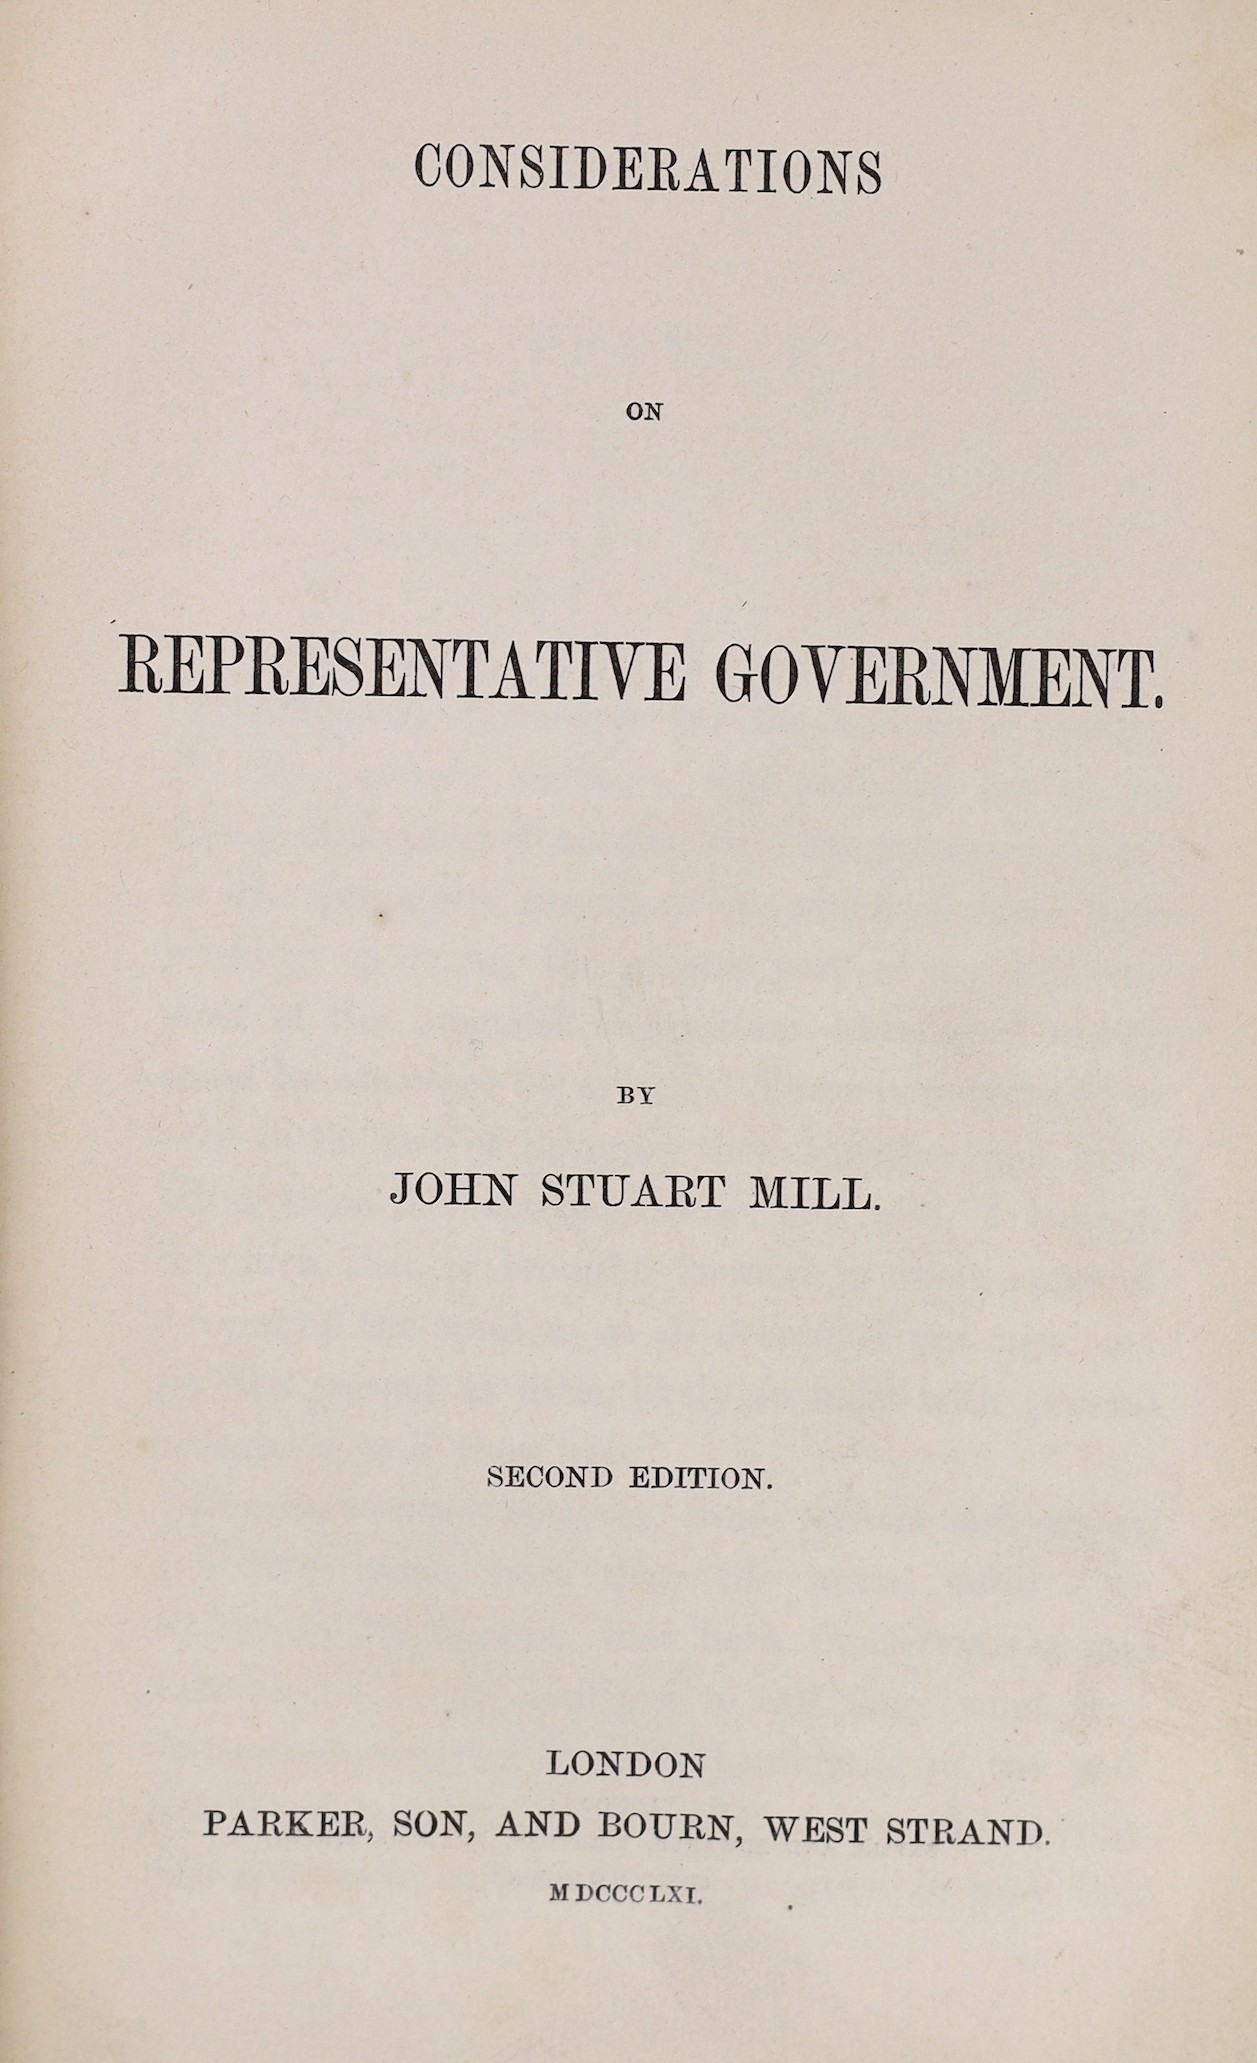 Mill, John Stuart - Considerations on Representative Government. 2nd edition. half title; original blind-decorated and gilt-lettered orange cloth. 1861